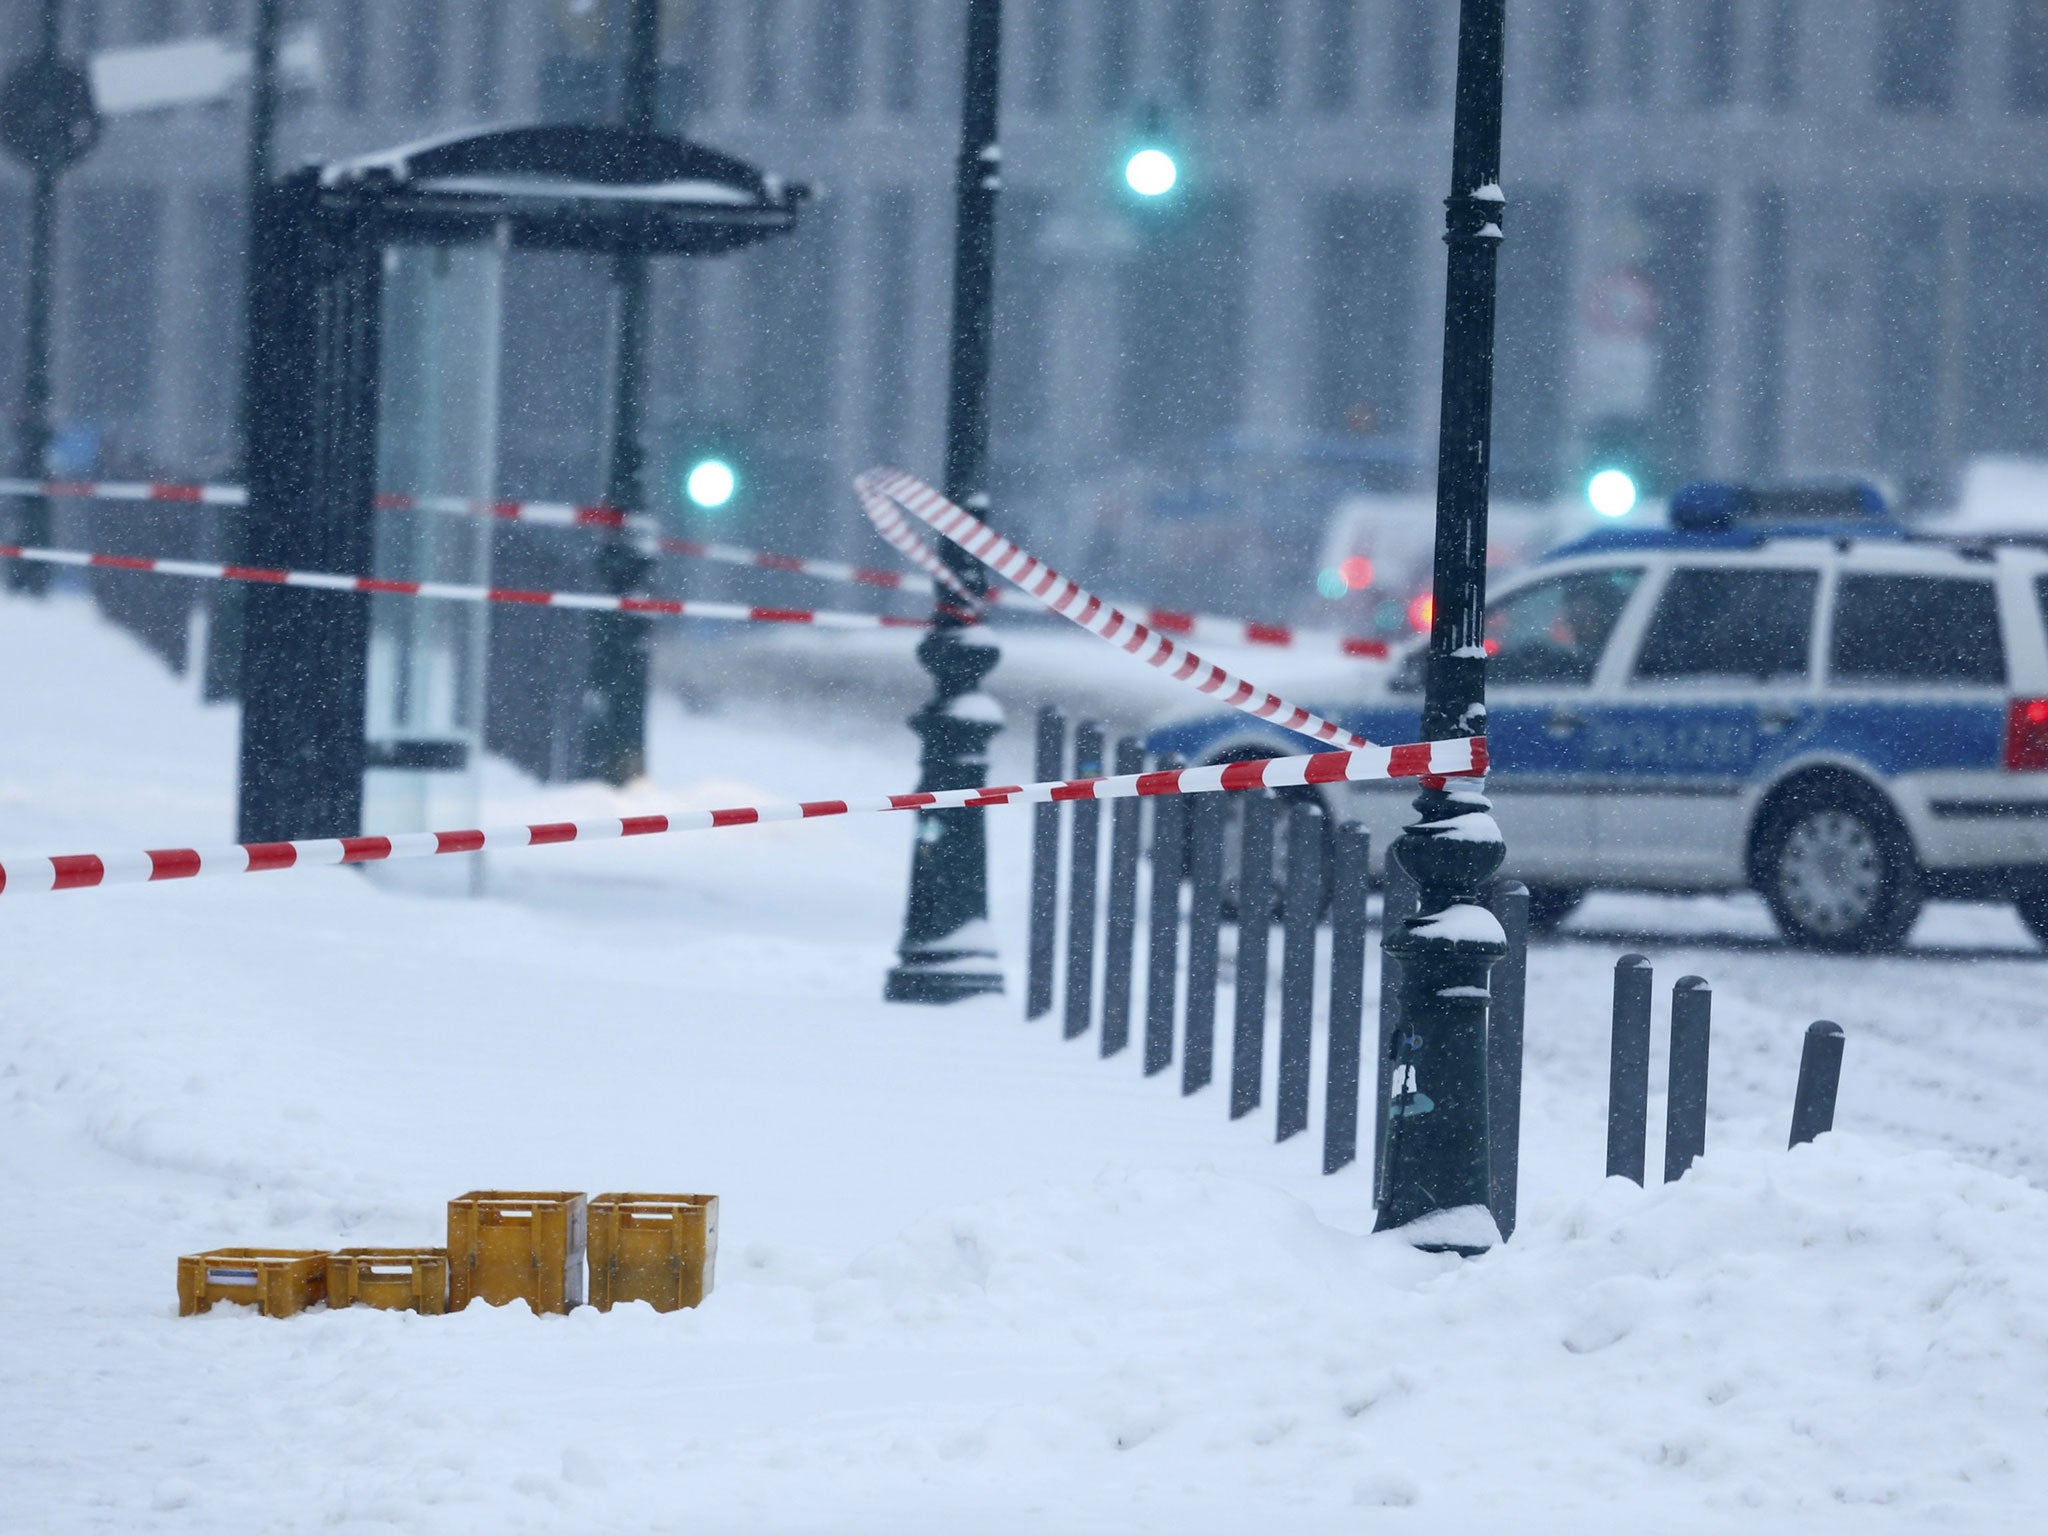 An image from the scene showed four yellow postal crates abandoned in heavy snow outside the chancellory in Berlin